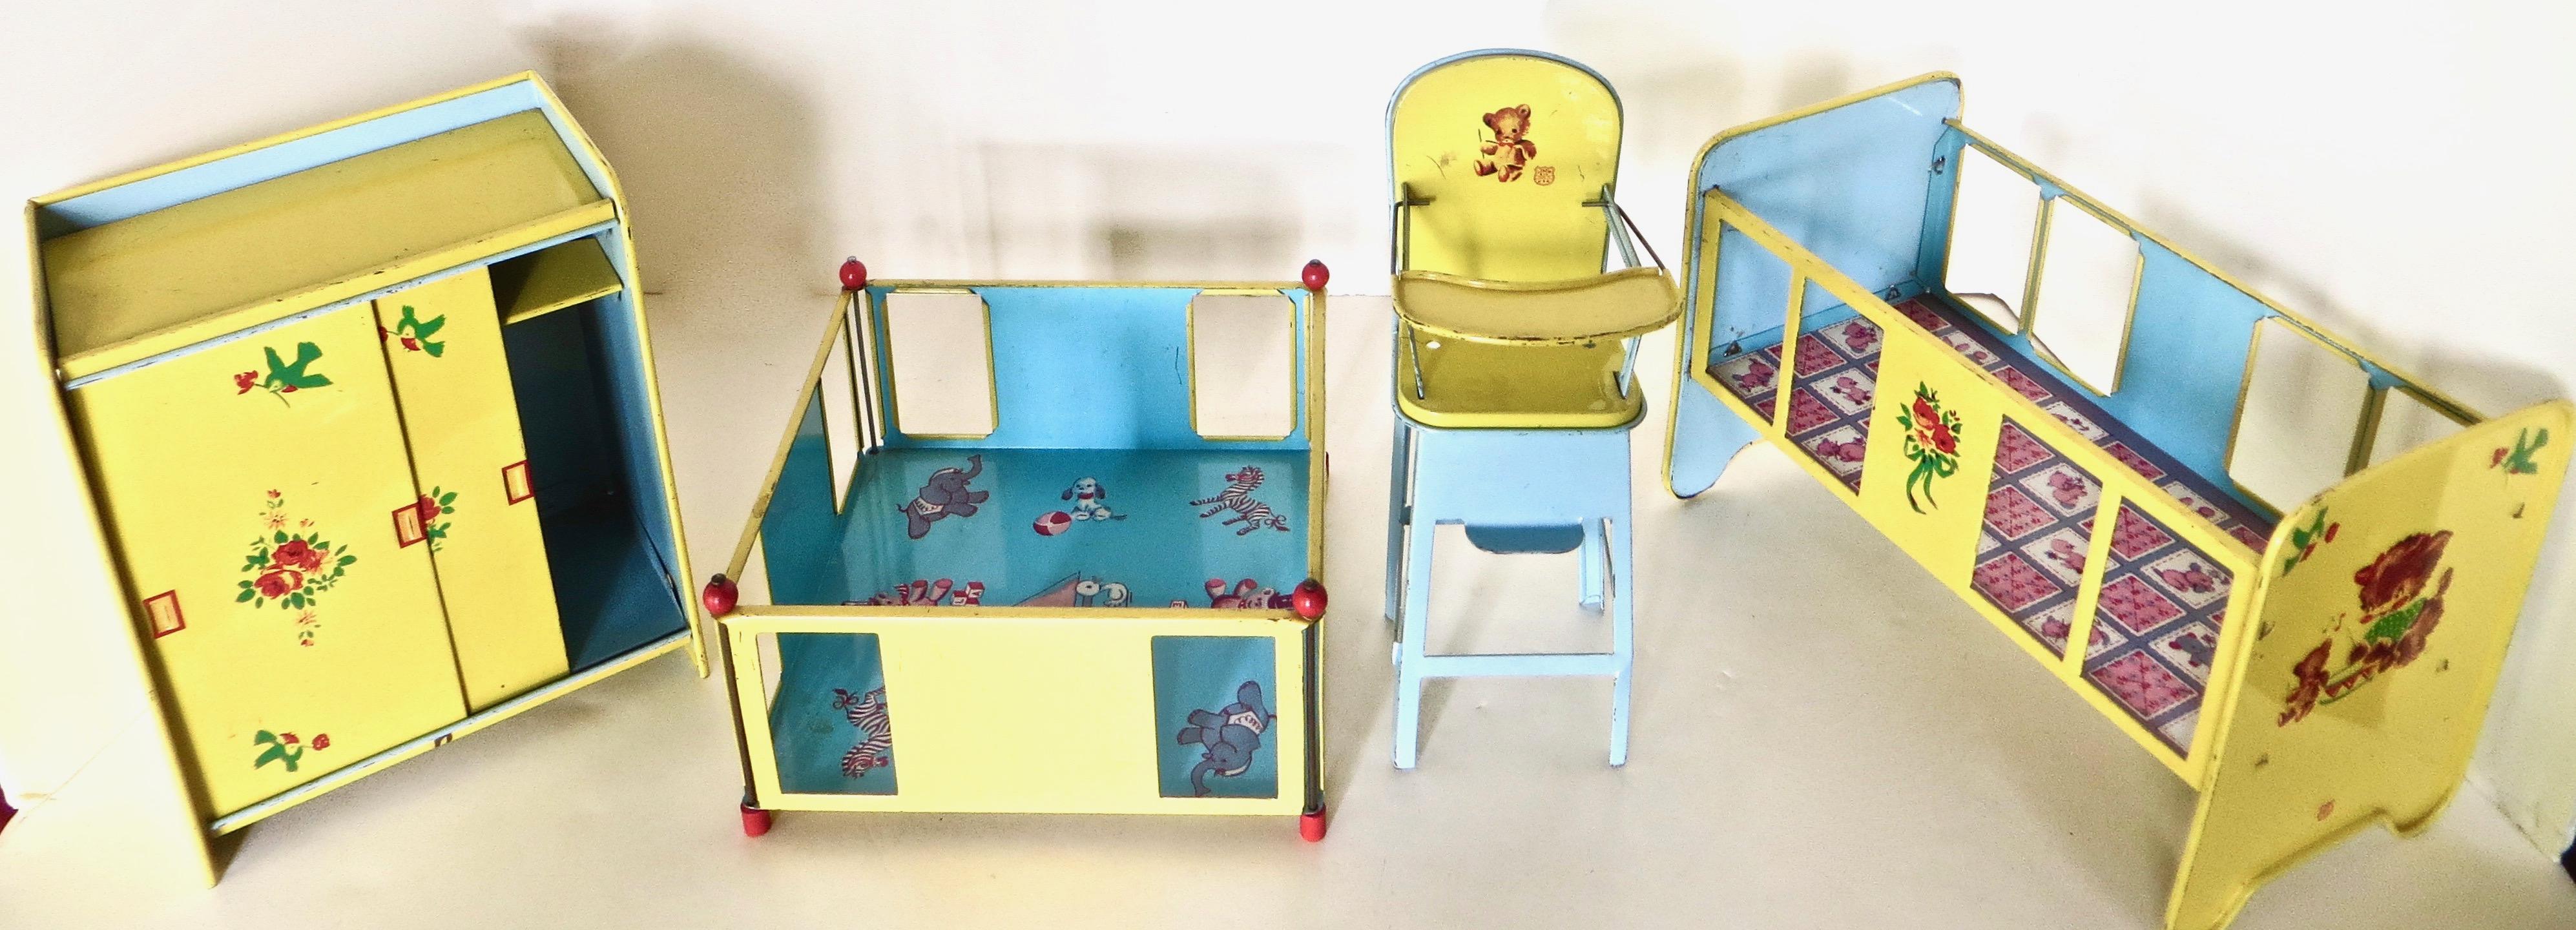 Four Piece Furniture Doll Set. All Tin. Circa 1950's For Sale 12